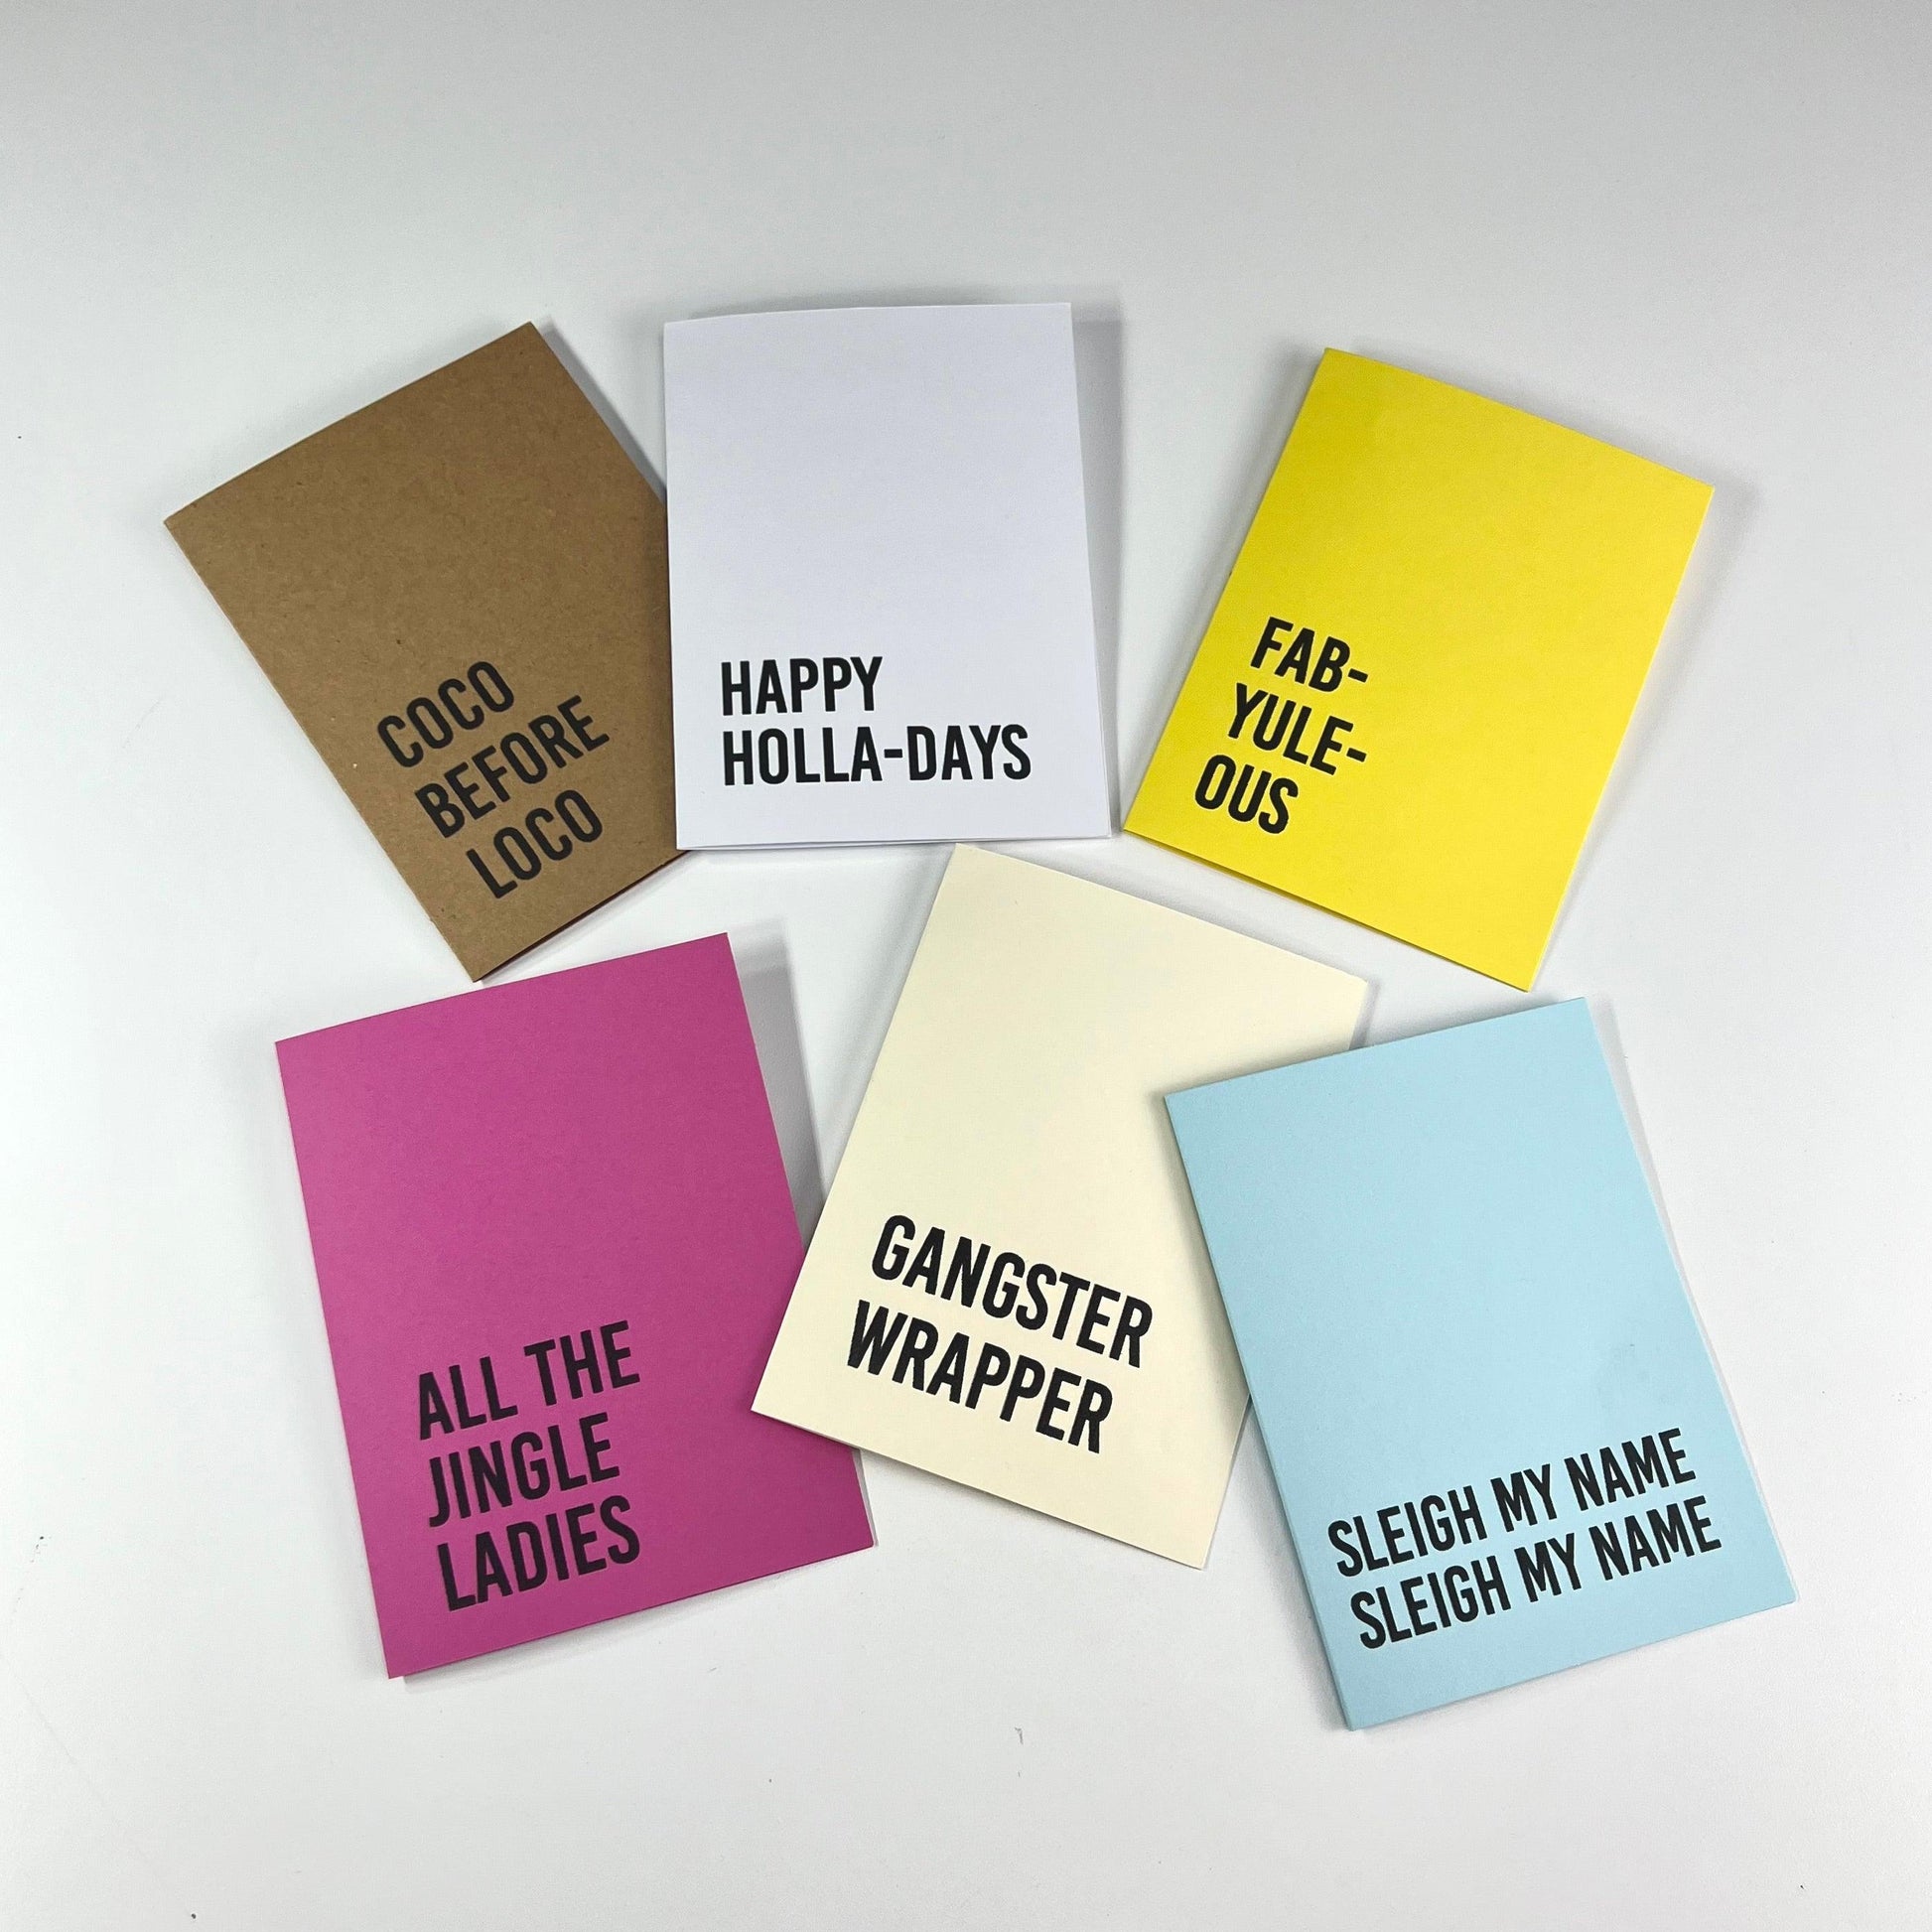 x6 Solid Color Holiday Christmas Cards. Each card is bright color with a bold minimilist font & a funny saying on the front.